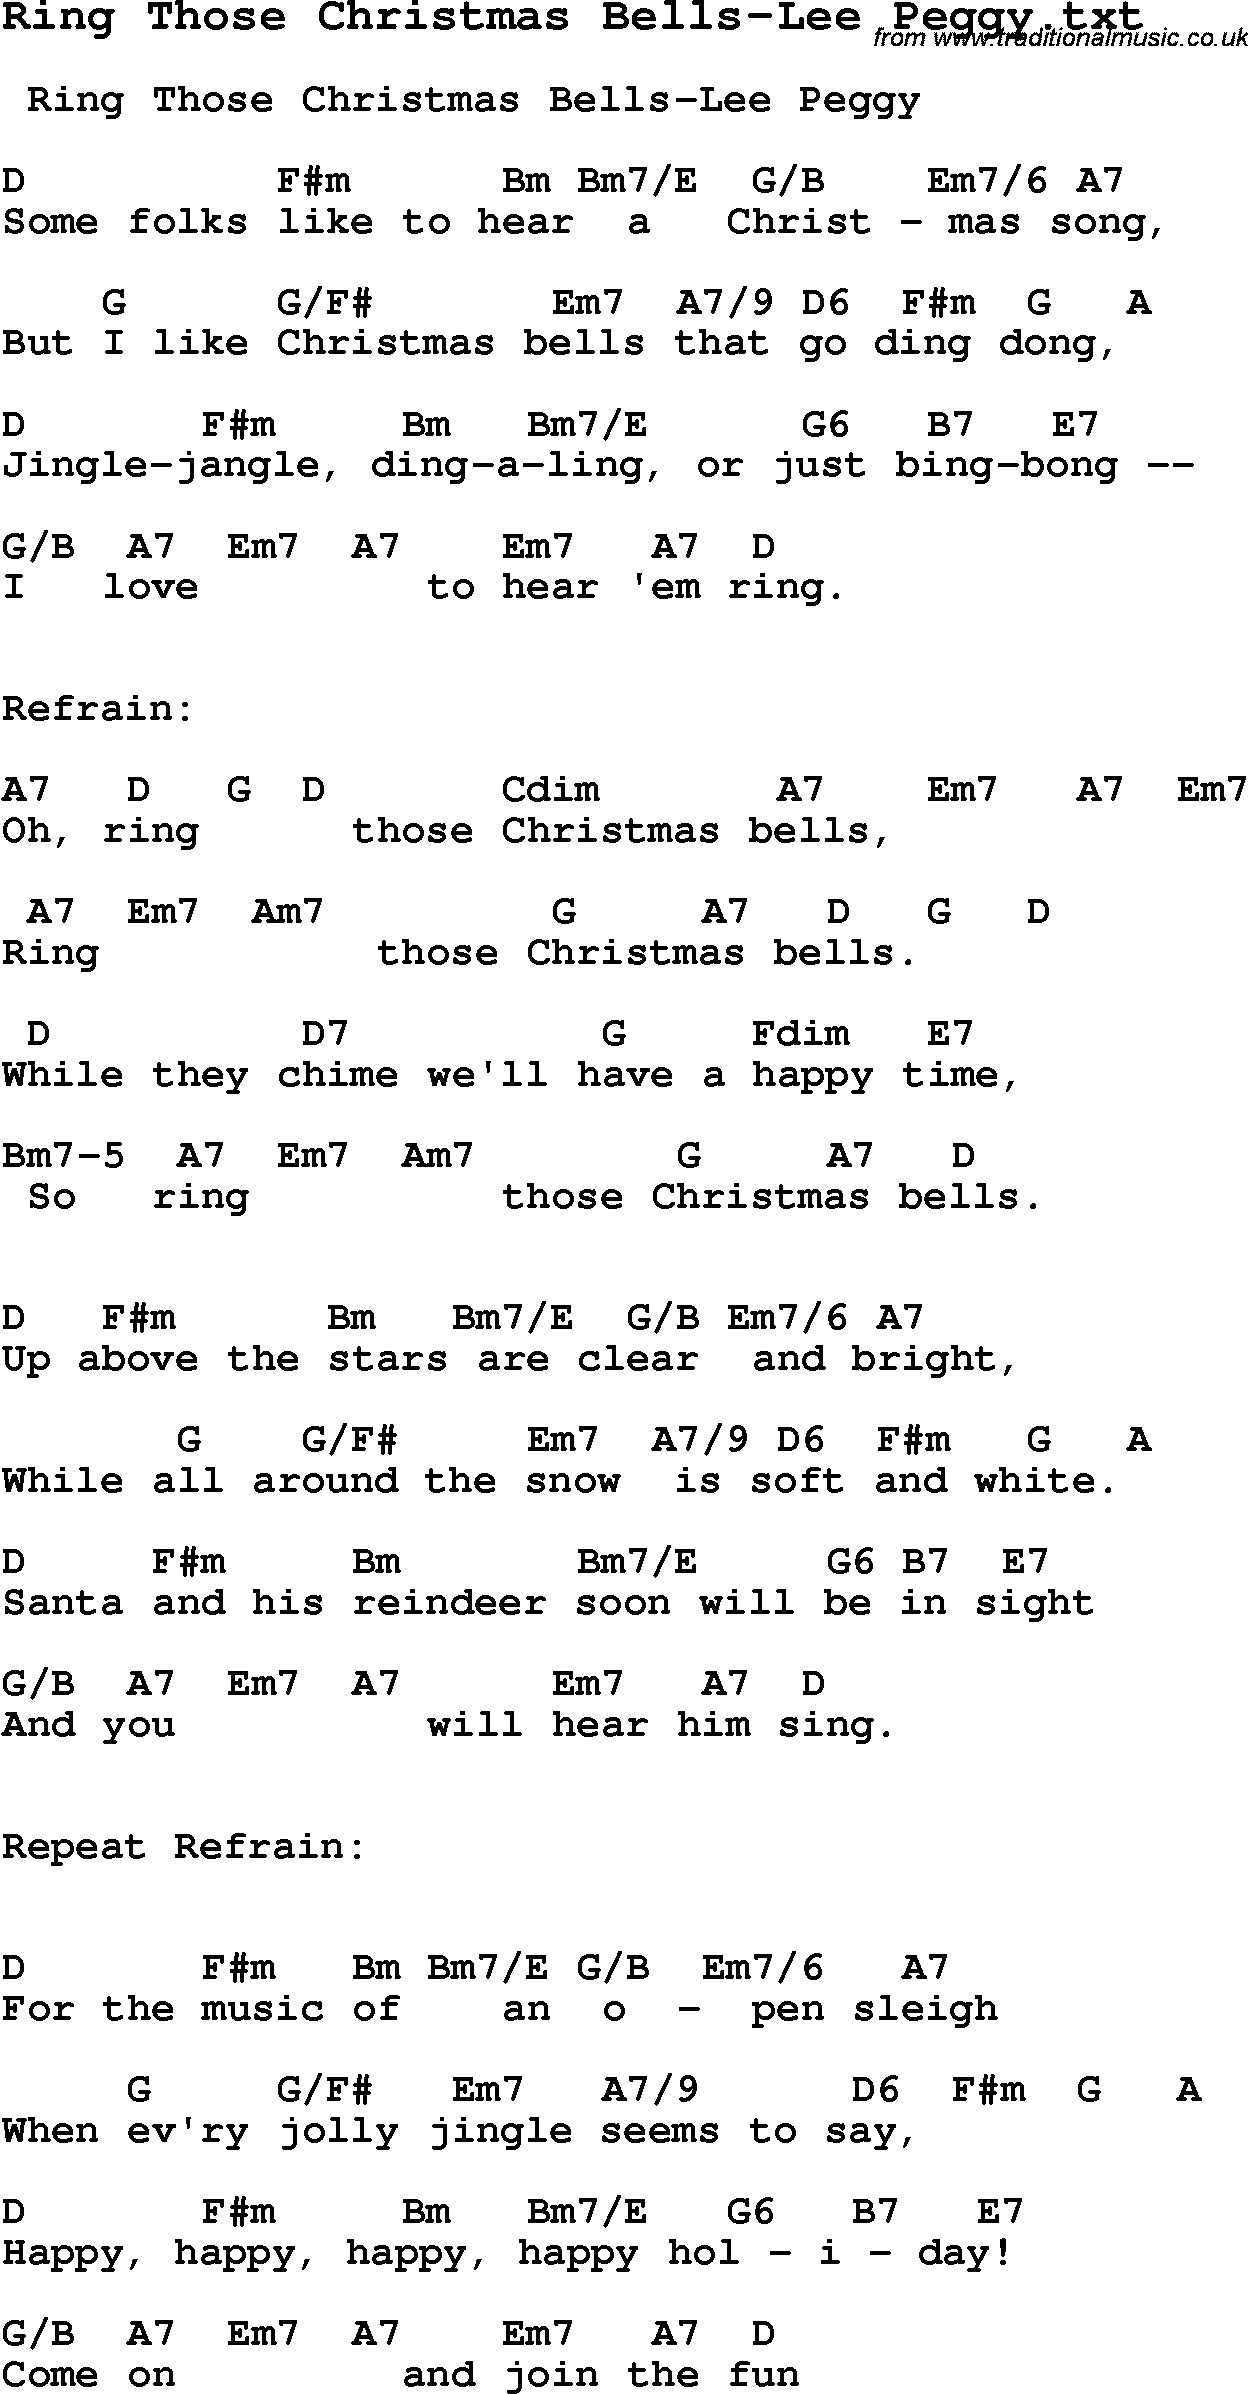 Jazz Song from top bands and vocal artists with chords, tabs and lyrics - Ring Those Christmas Bells-Lee Peggy